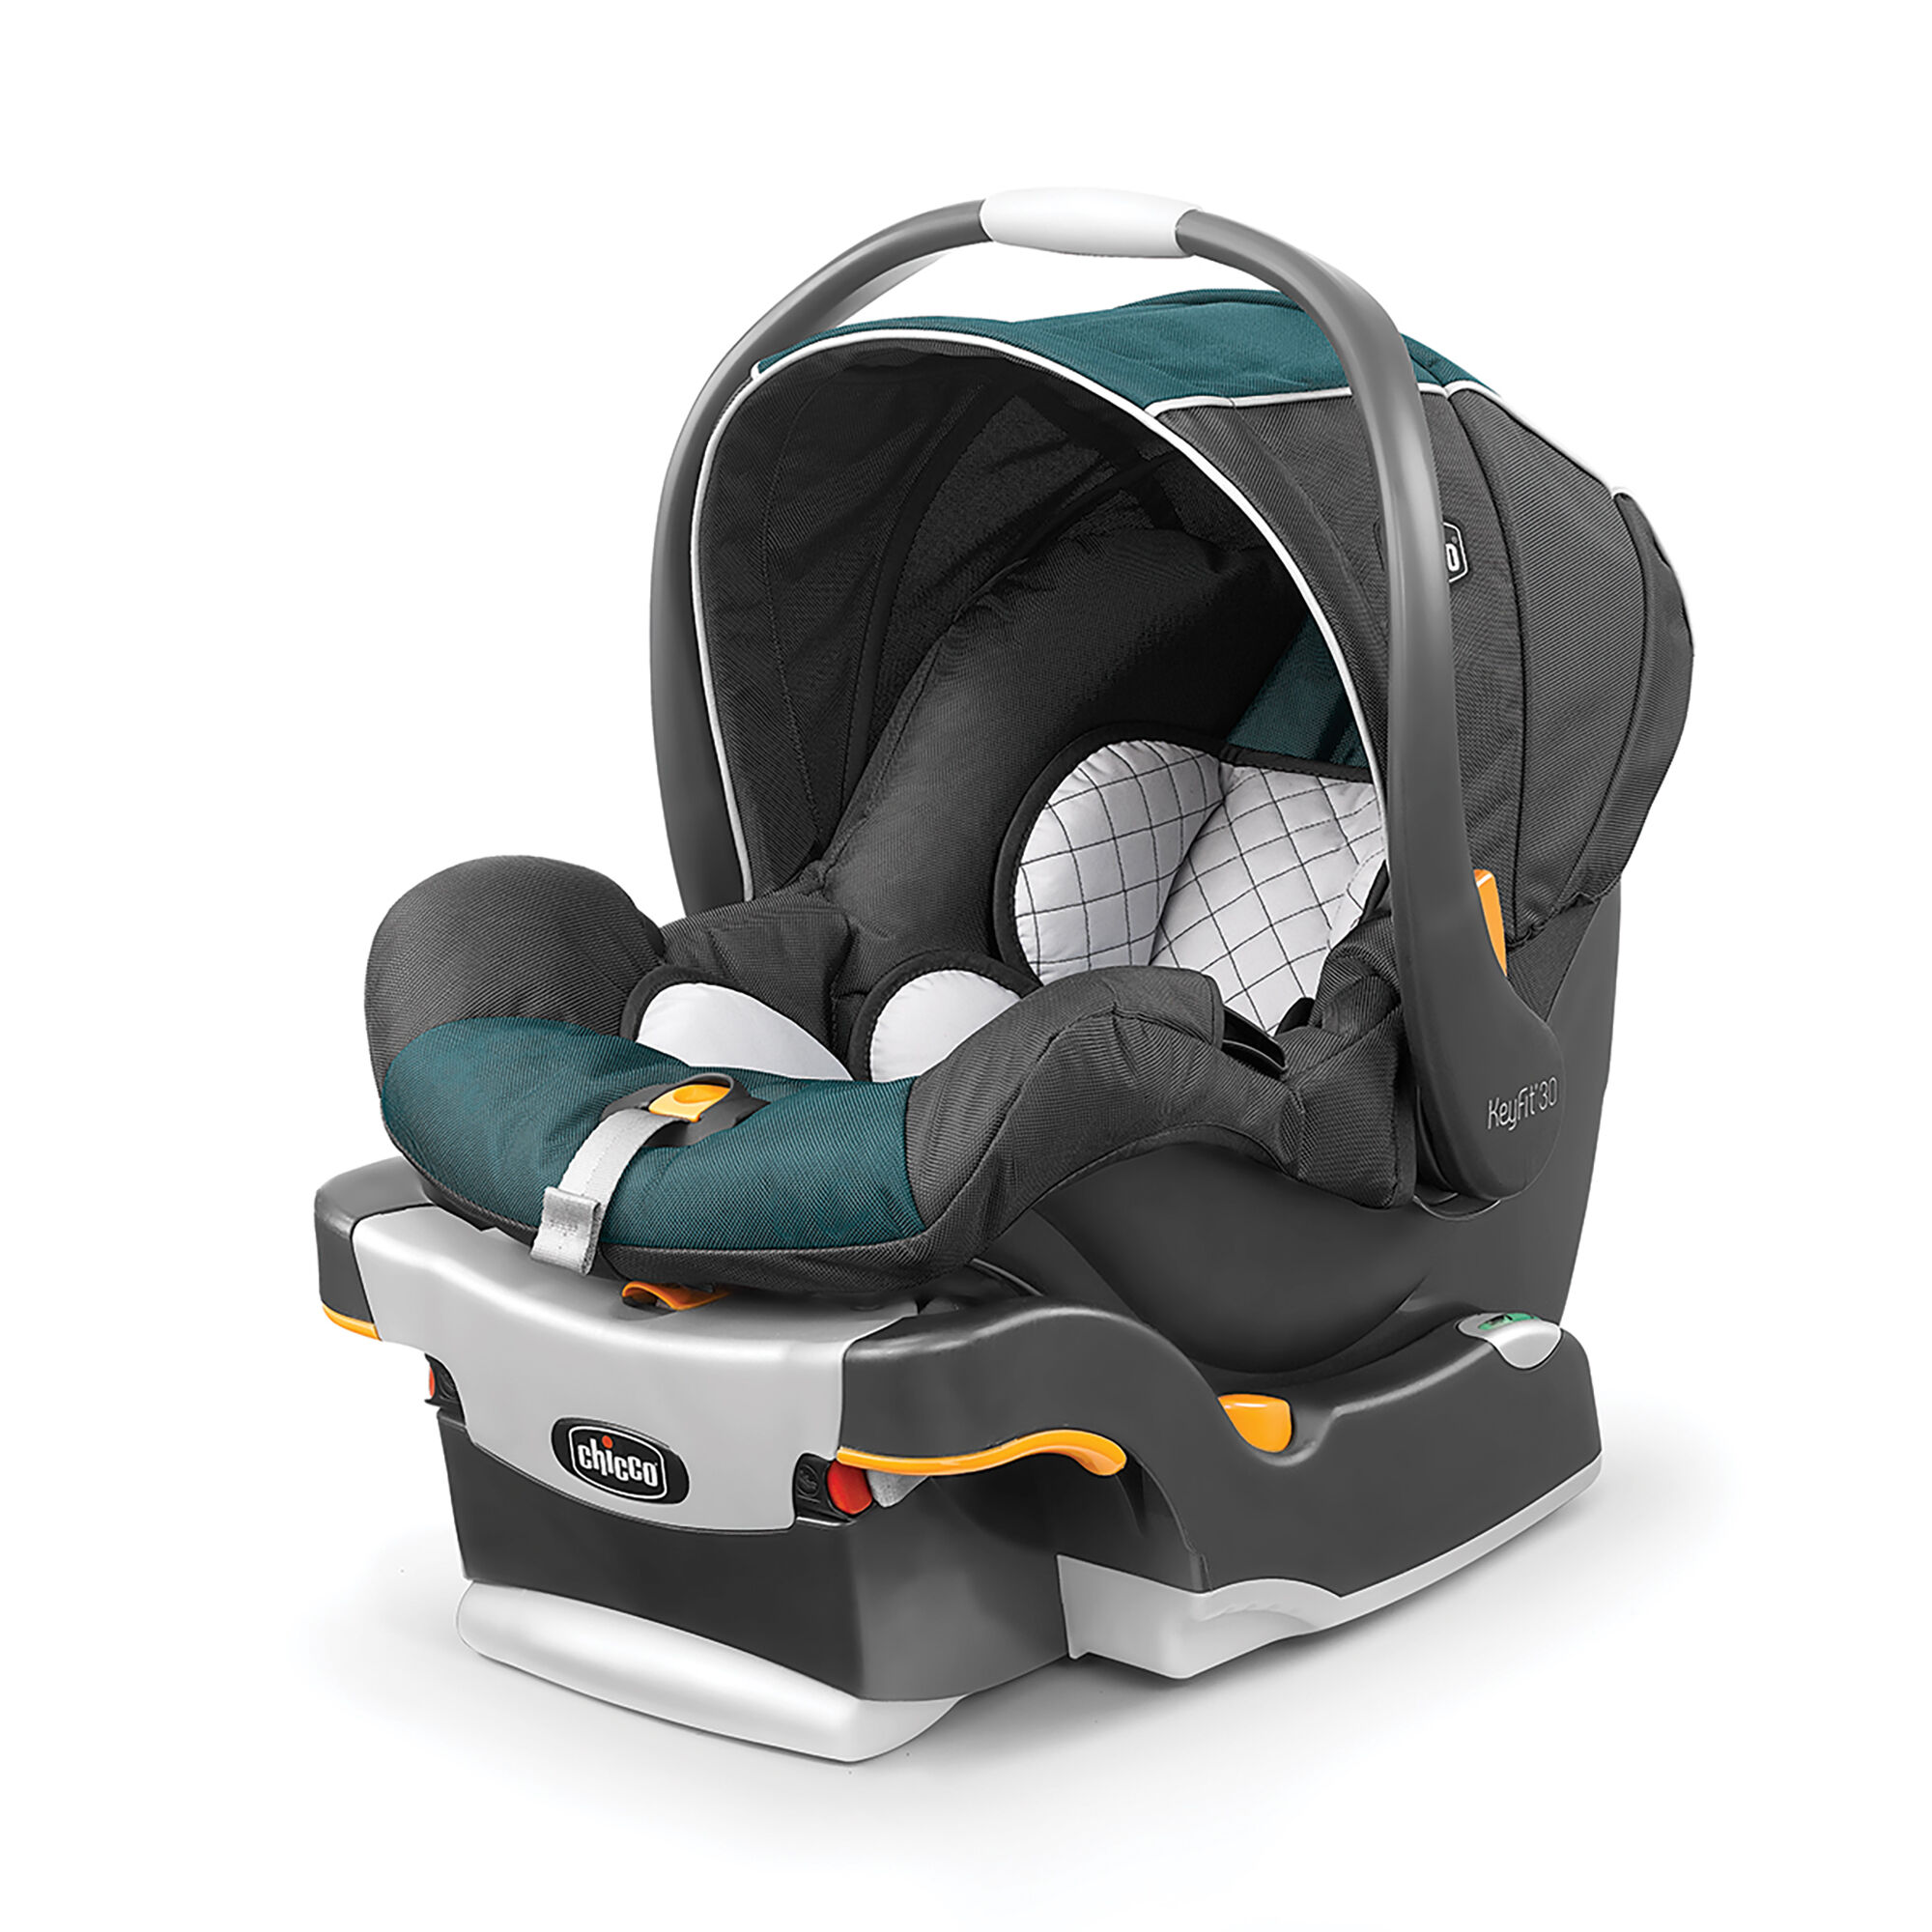 KeyFit 30 Infant Car Seat | Chicco